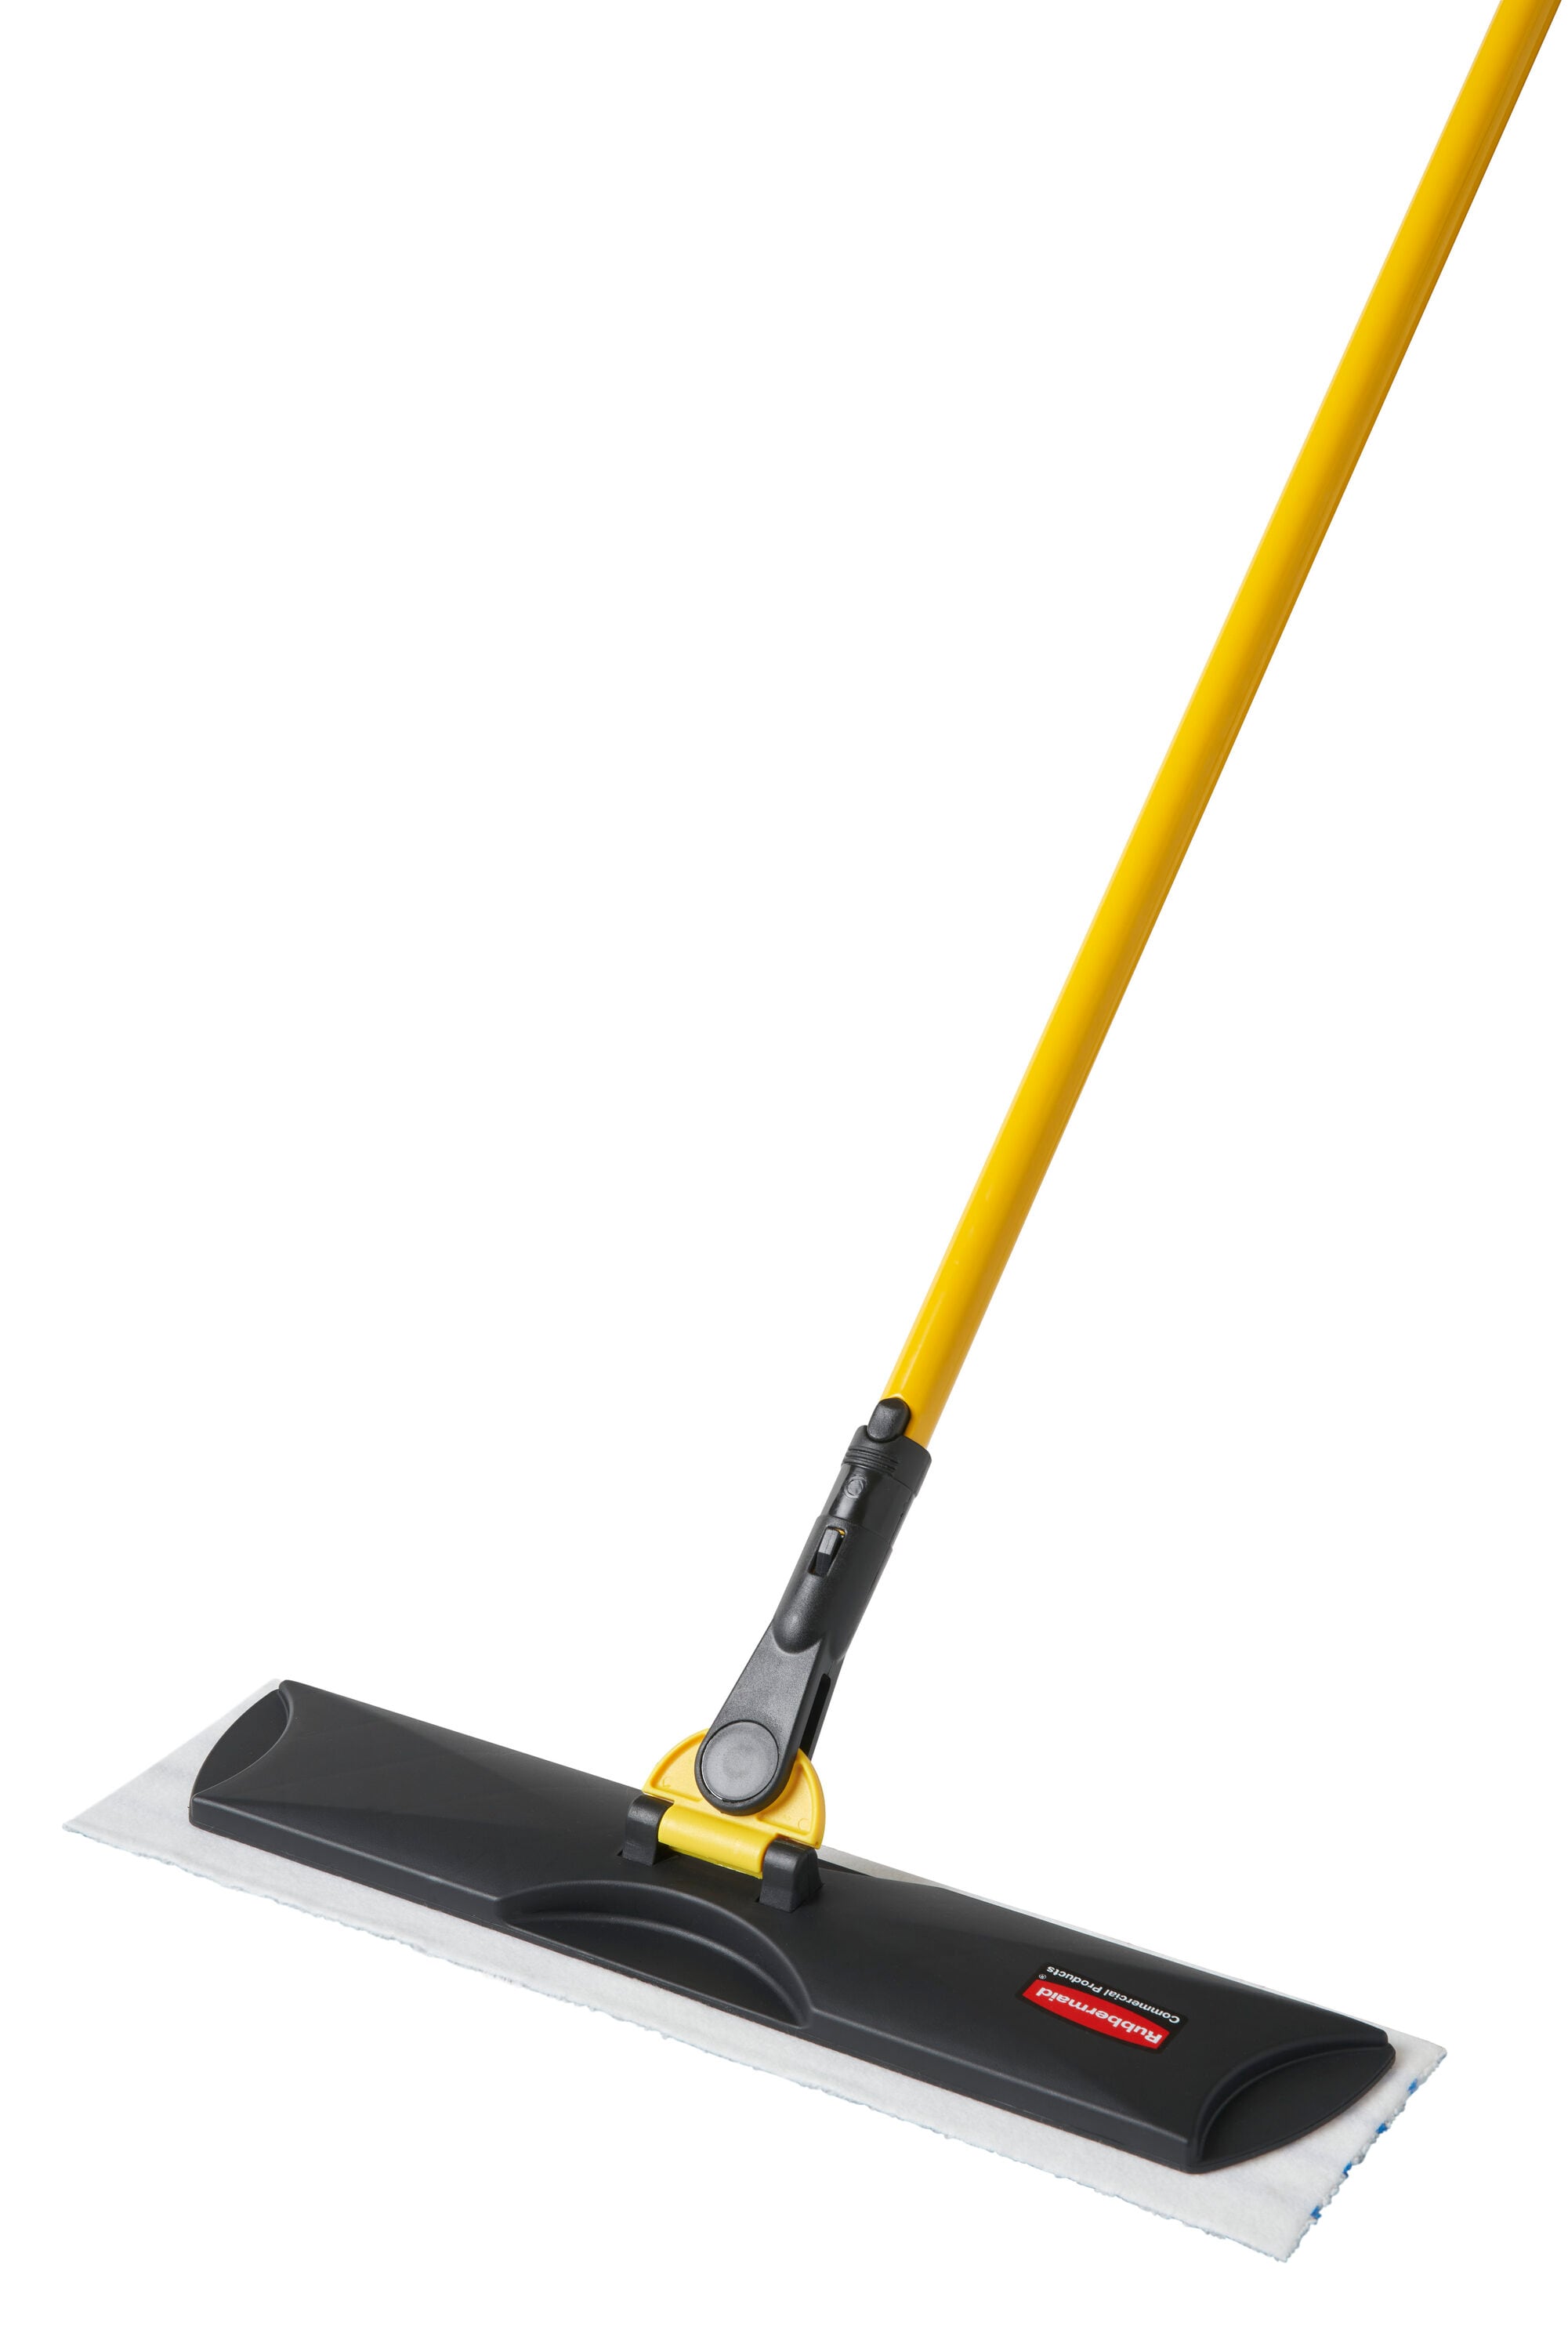 Rubbermaid Hygen Quick Connect S-S Frame, Yellow, Wet/Dry Mop